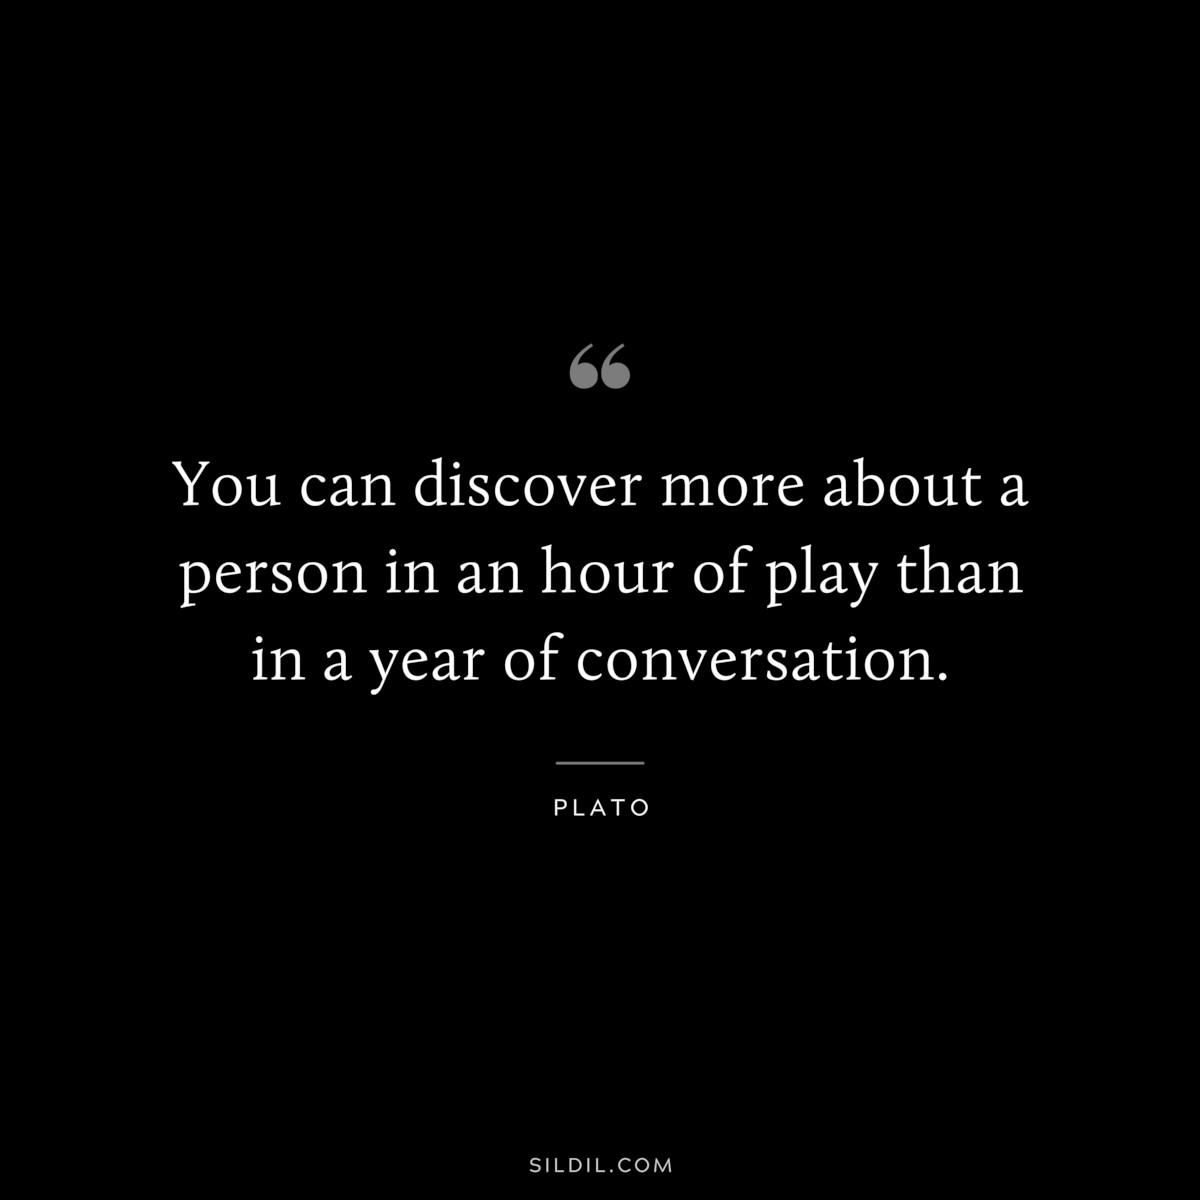 You can discover more about a person in an hour of play than in a year of conversation. ― Plato